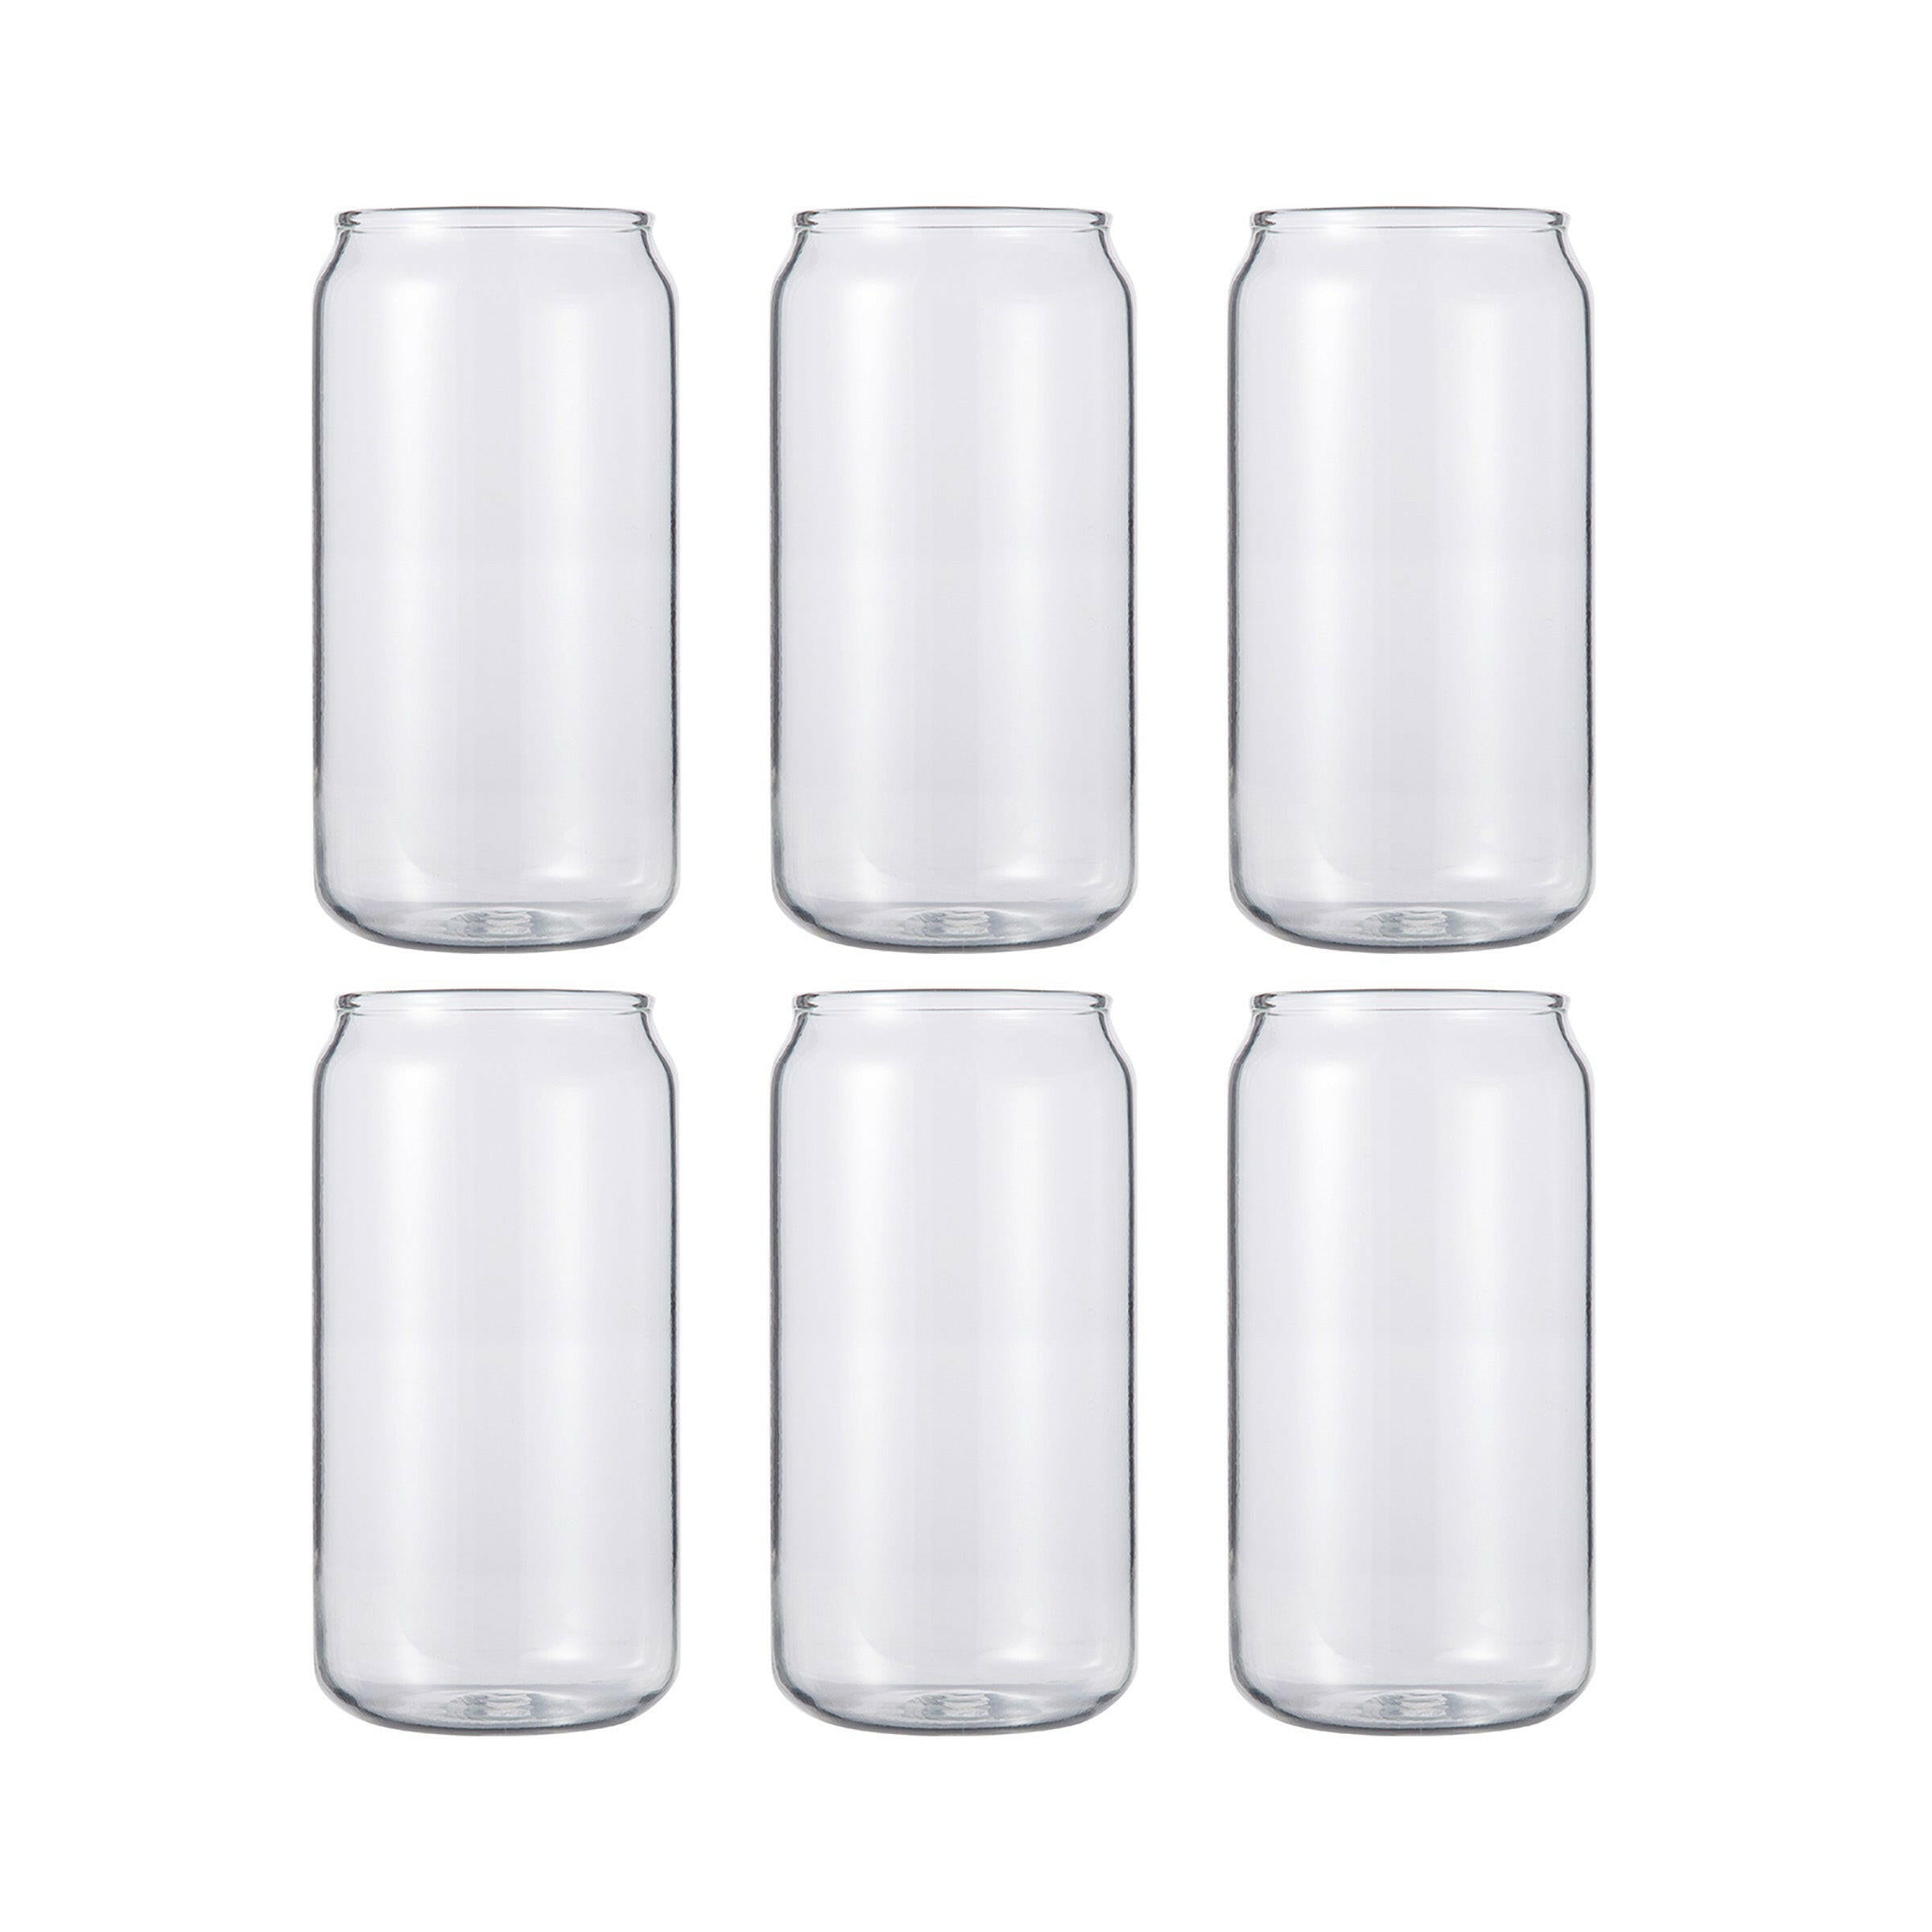 Craft Express 6 Pack of Stemless Stainless Steel S